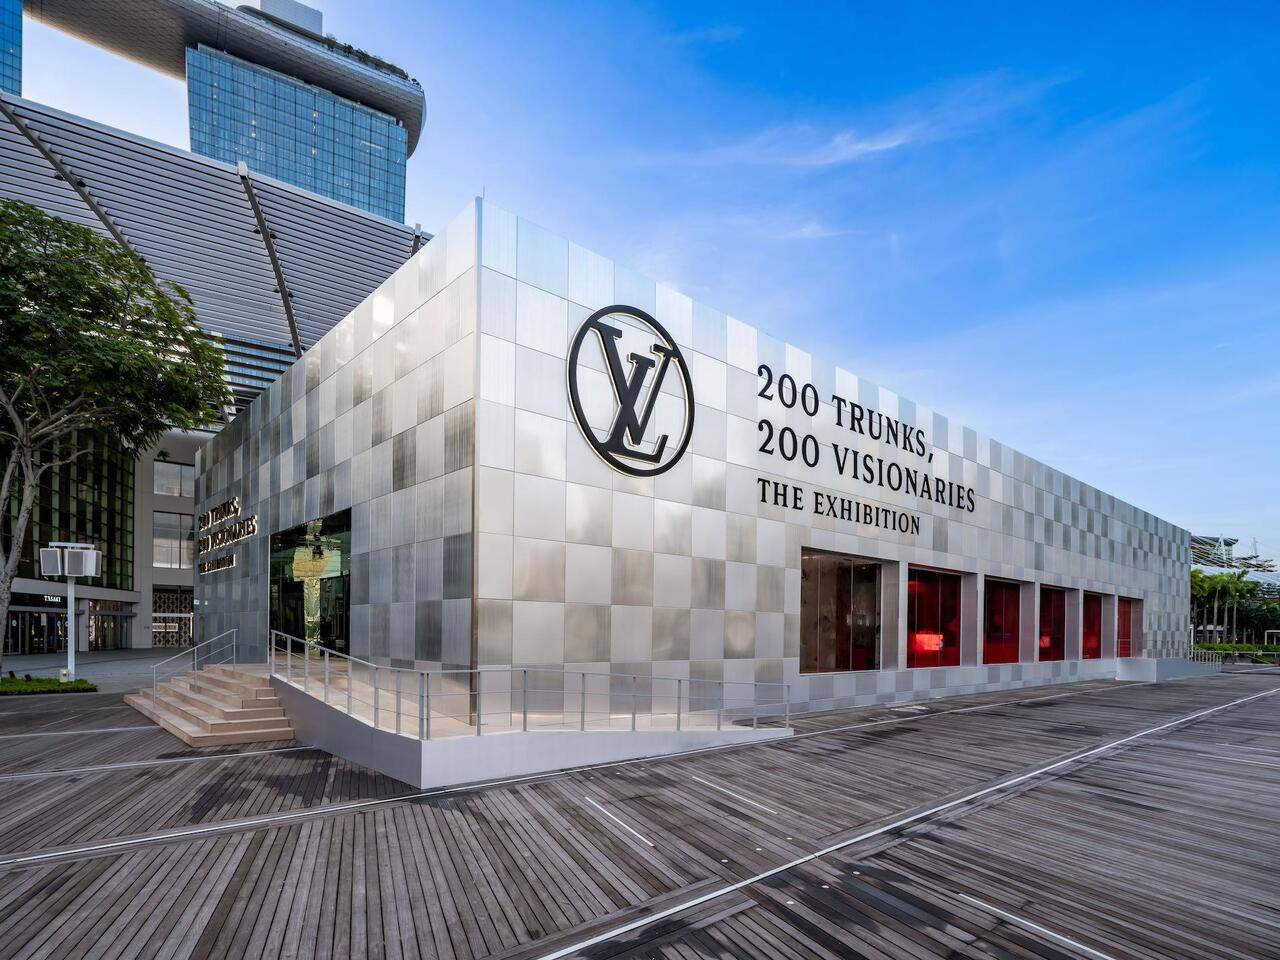 200 TRUNKS 200 VISIONARIES : THE EXHIBITION by Louis Vuitton in